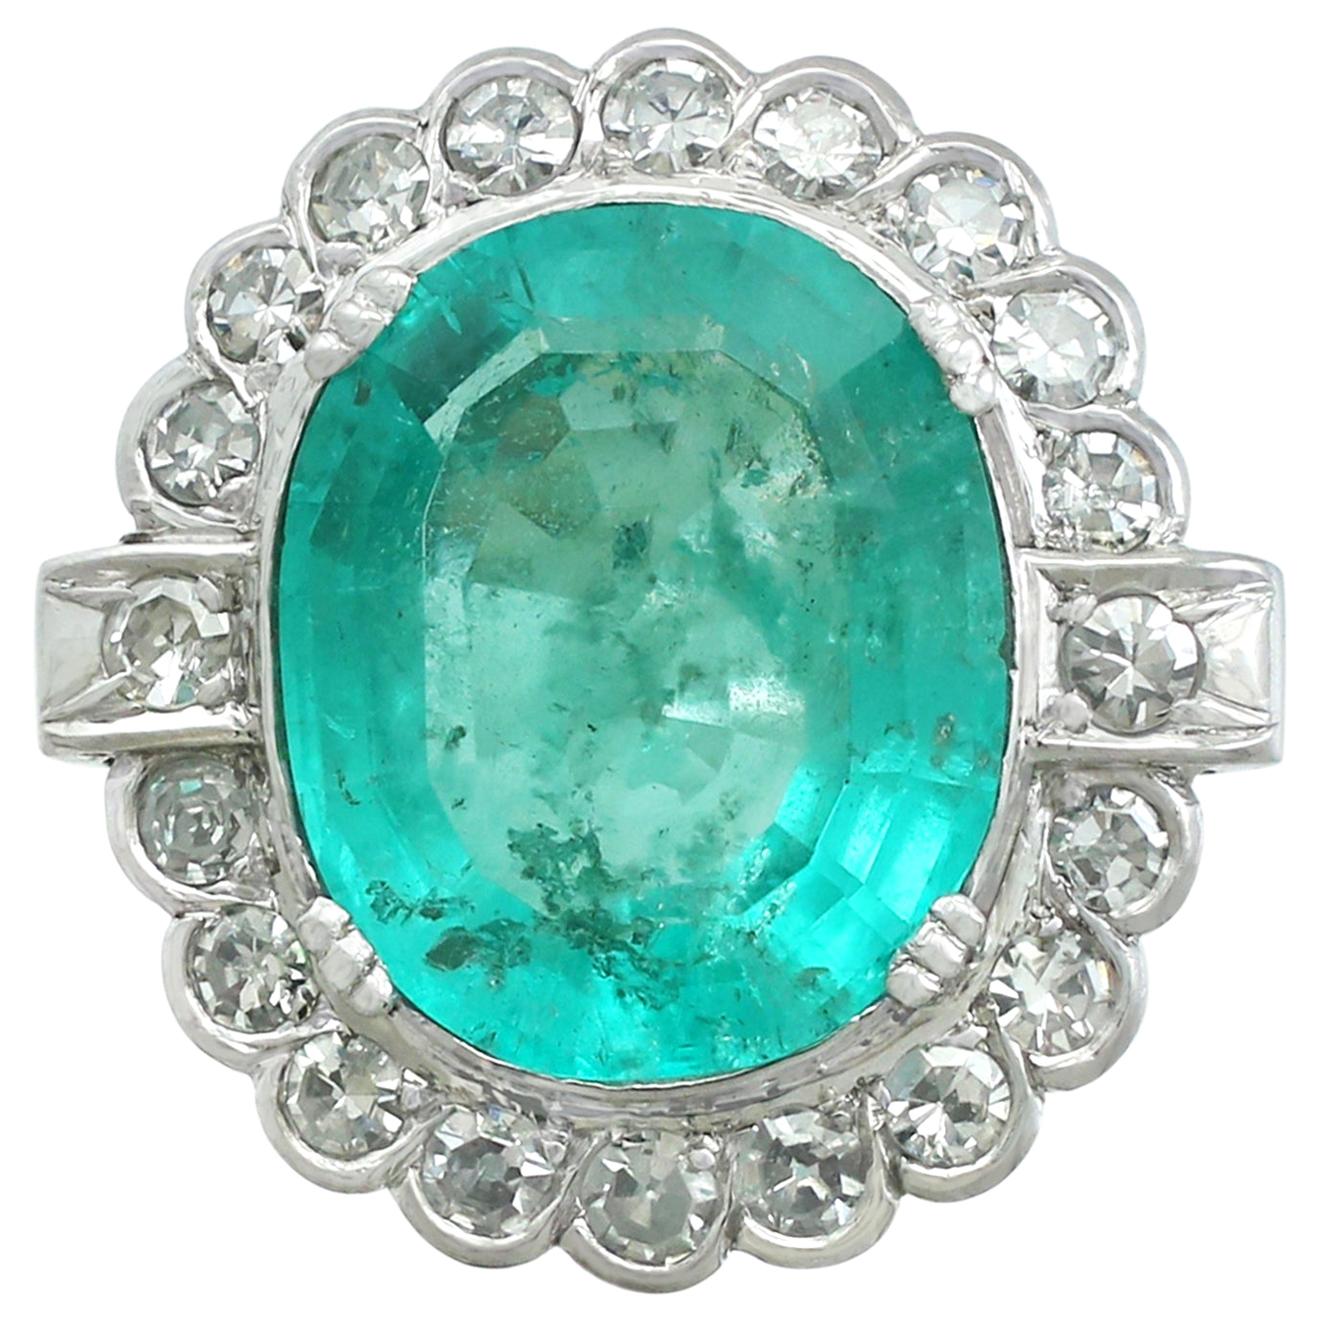 1950s 8.19 Carat Emerald and 1.48 Carat Diamond White Gold Cocktail Ring